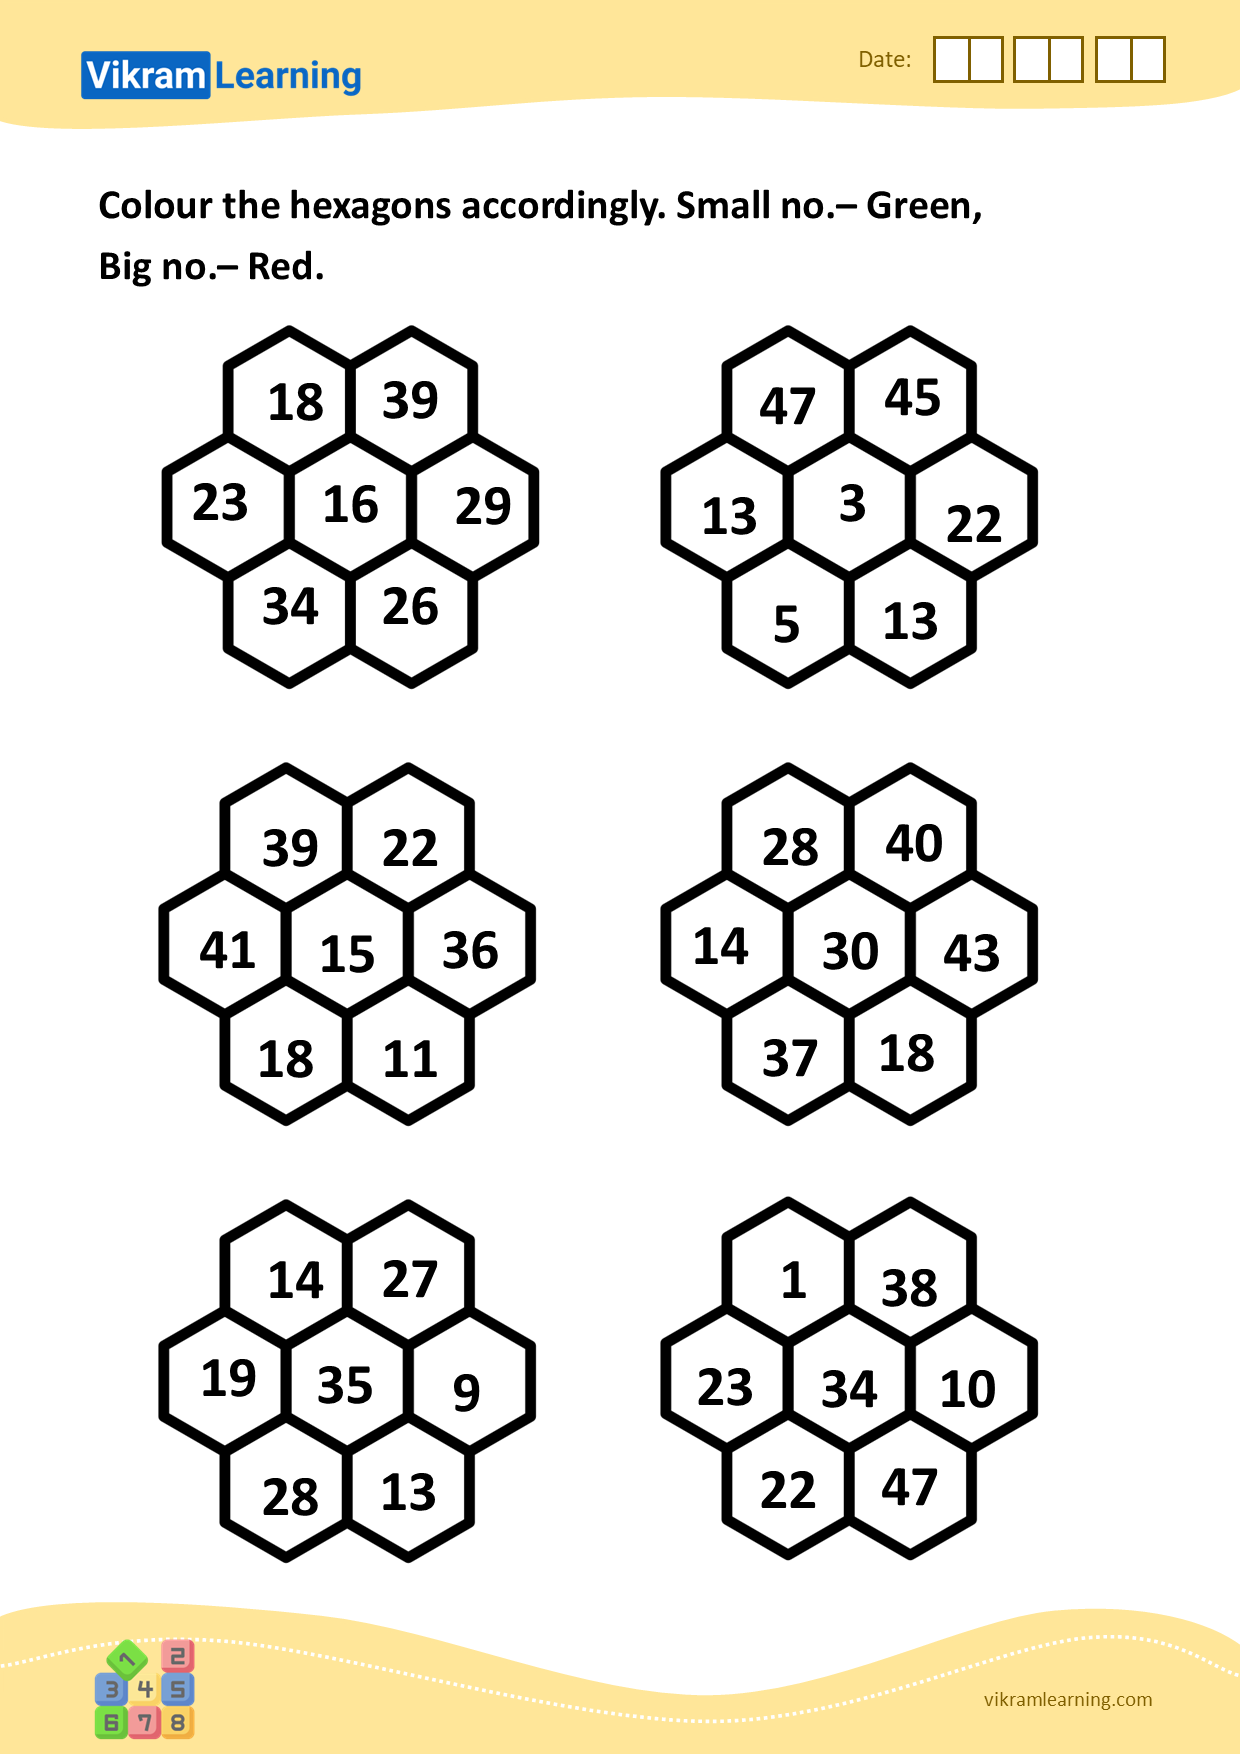 Download colour the hexagons accordingly. small no.– green, big no.– red worksheets